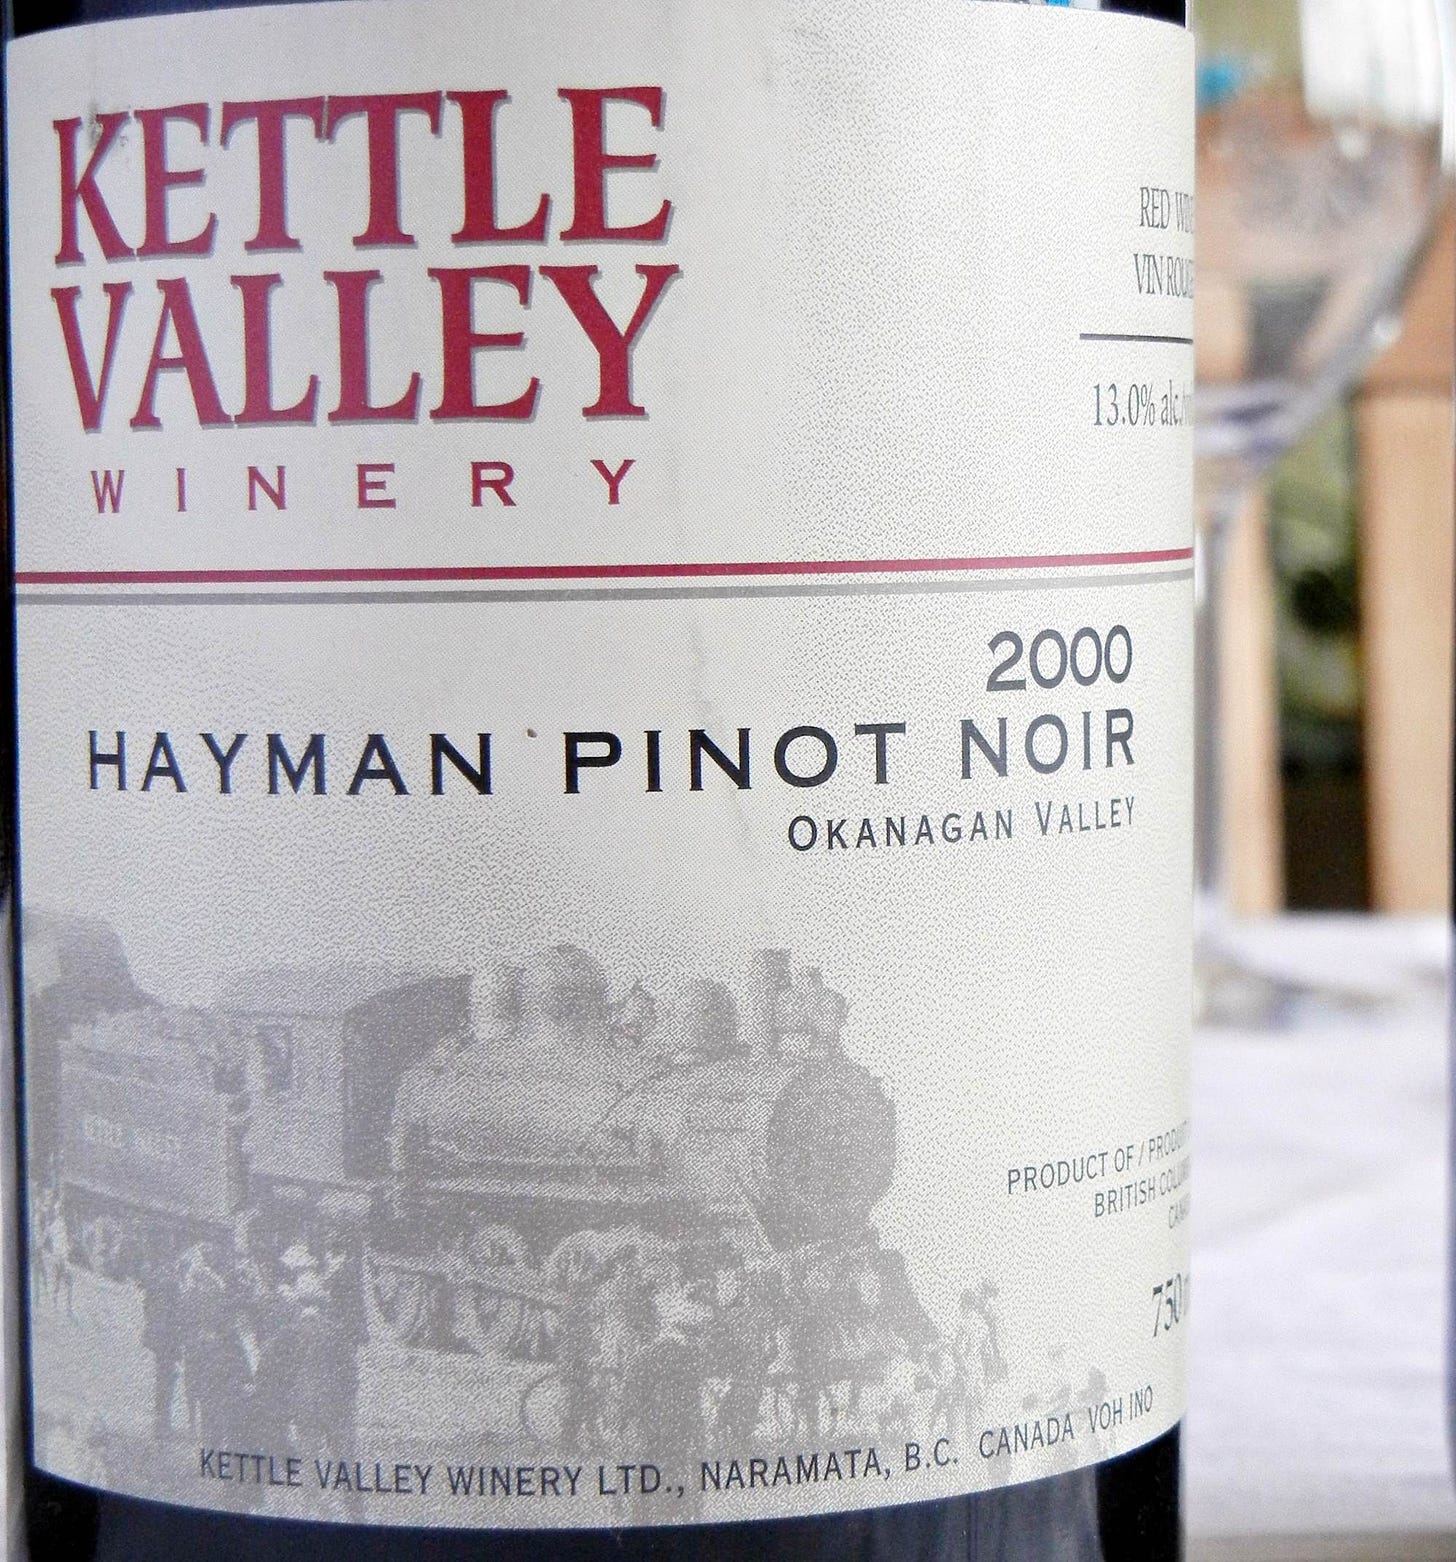 Kettle Valley Hayman Pinot Noir 2000 Label - BC Pinot Noir Tasting Review 25 